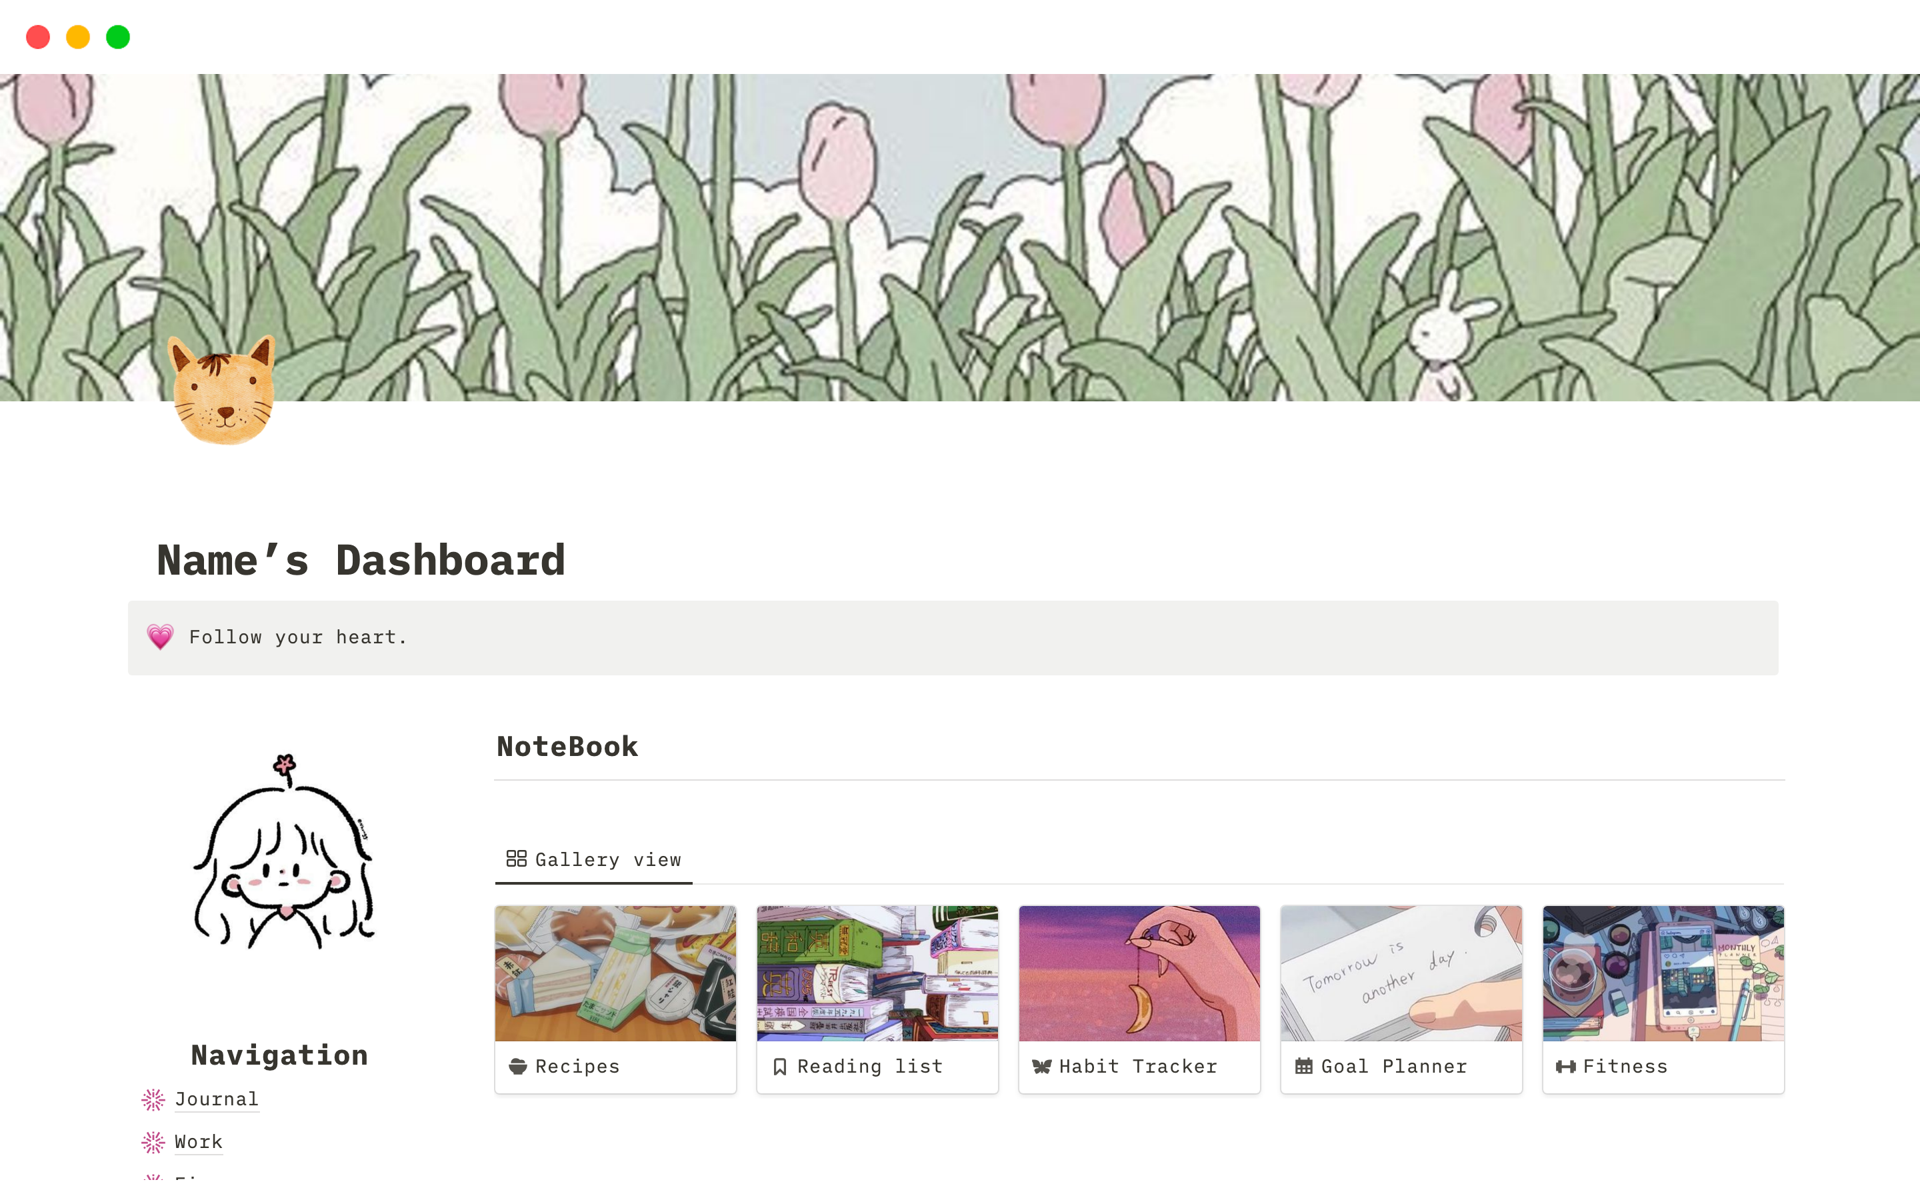 My Notion dashboard template helps you stay organized and on track with your goals.